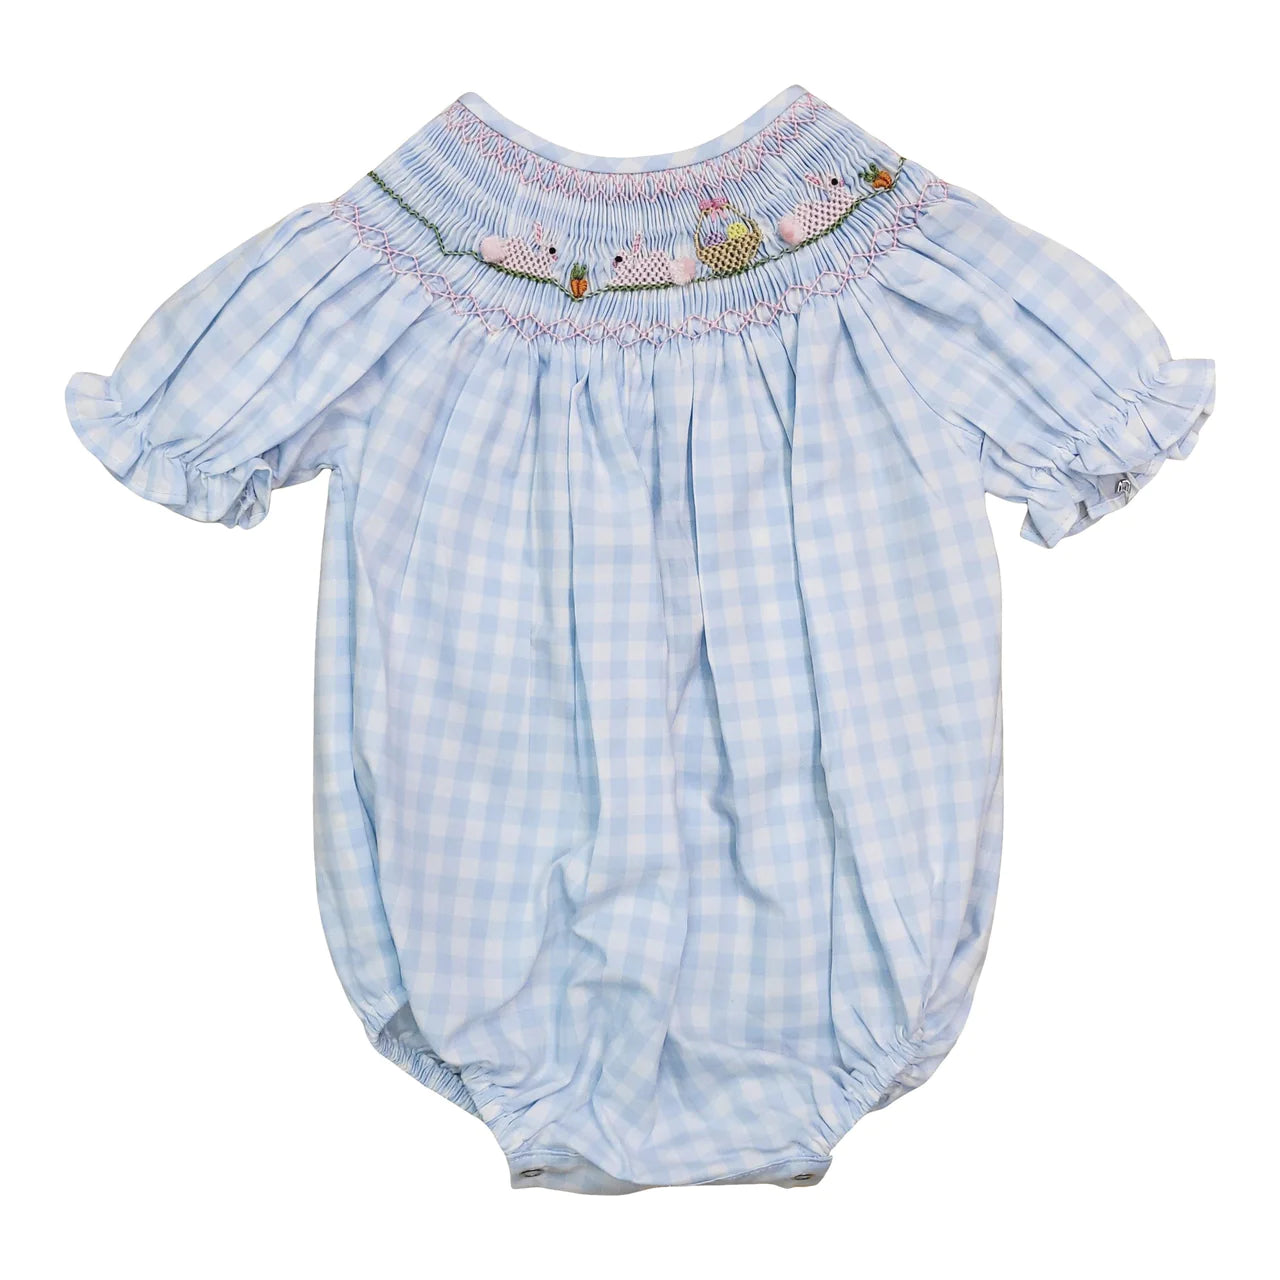 Bunny and Basket Blue Gingham Smocked Bubble